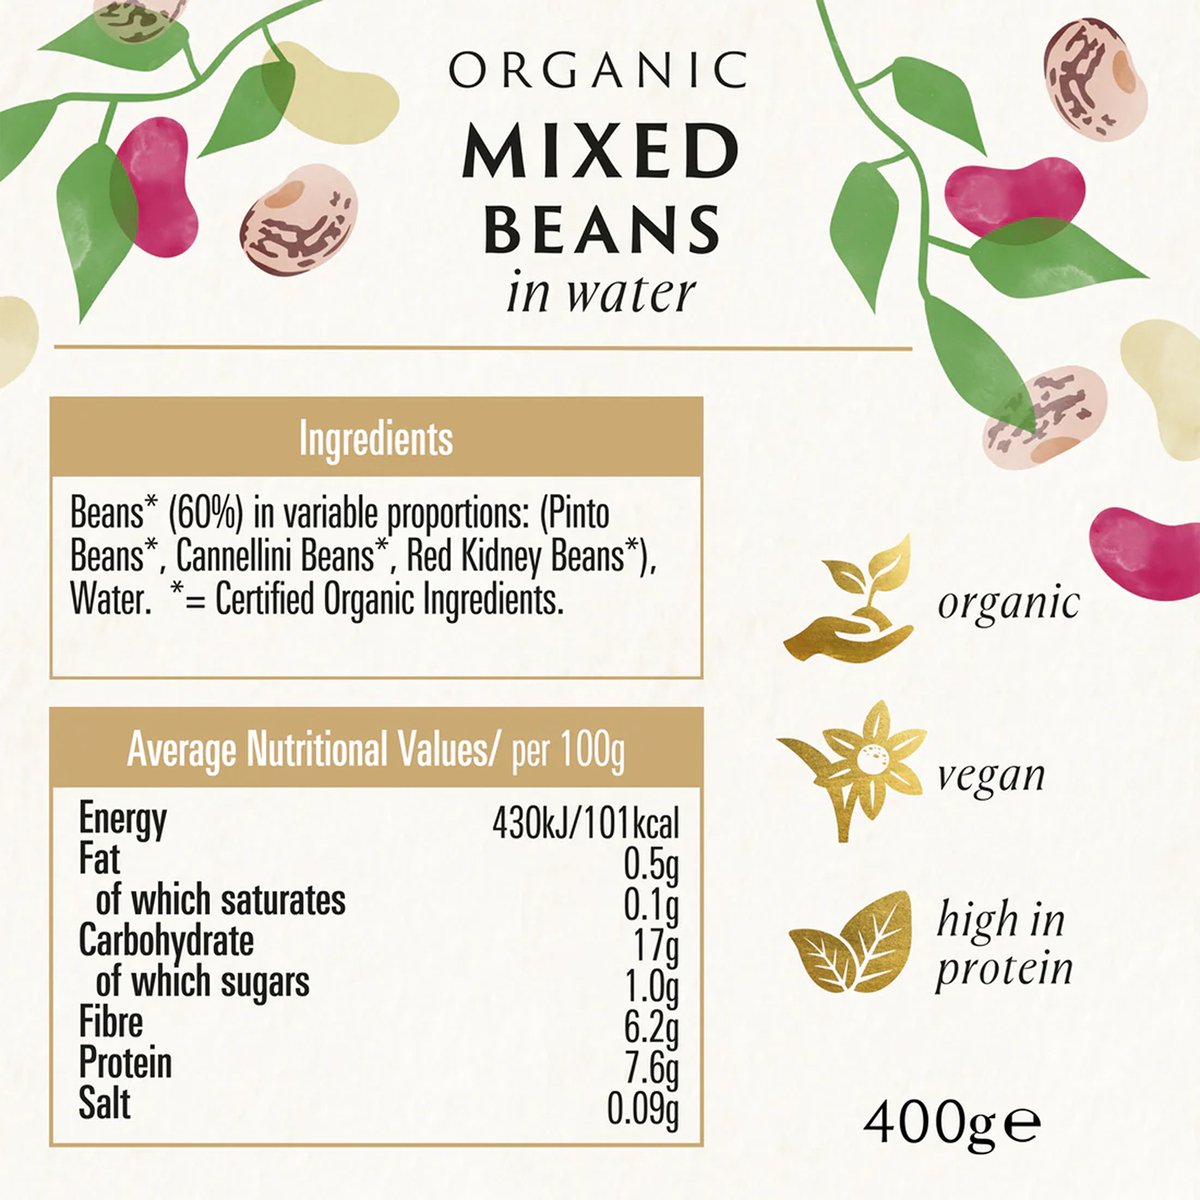 Biona Organic Mixed Beans in Water 400 g